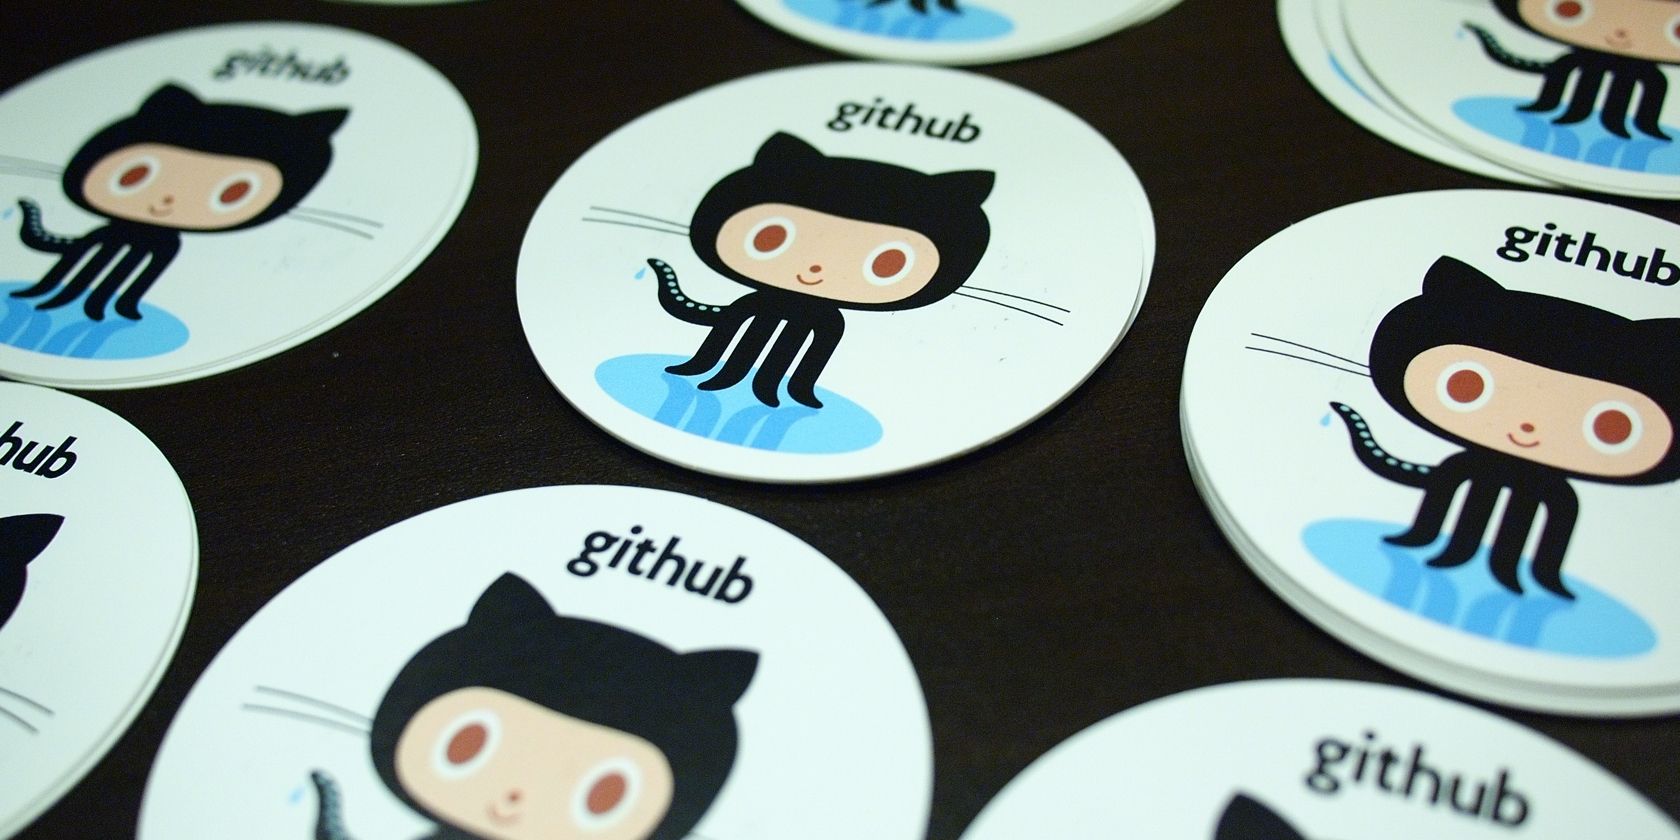 github octocat stickers laid across table